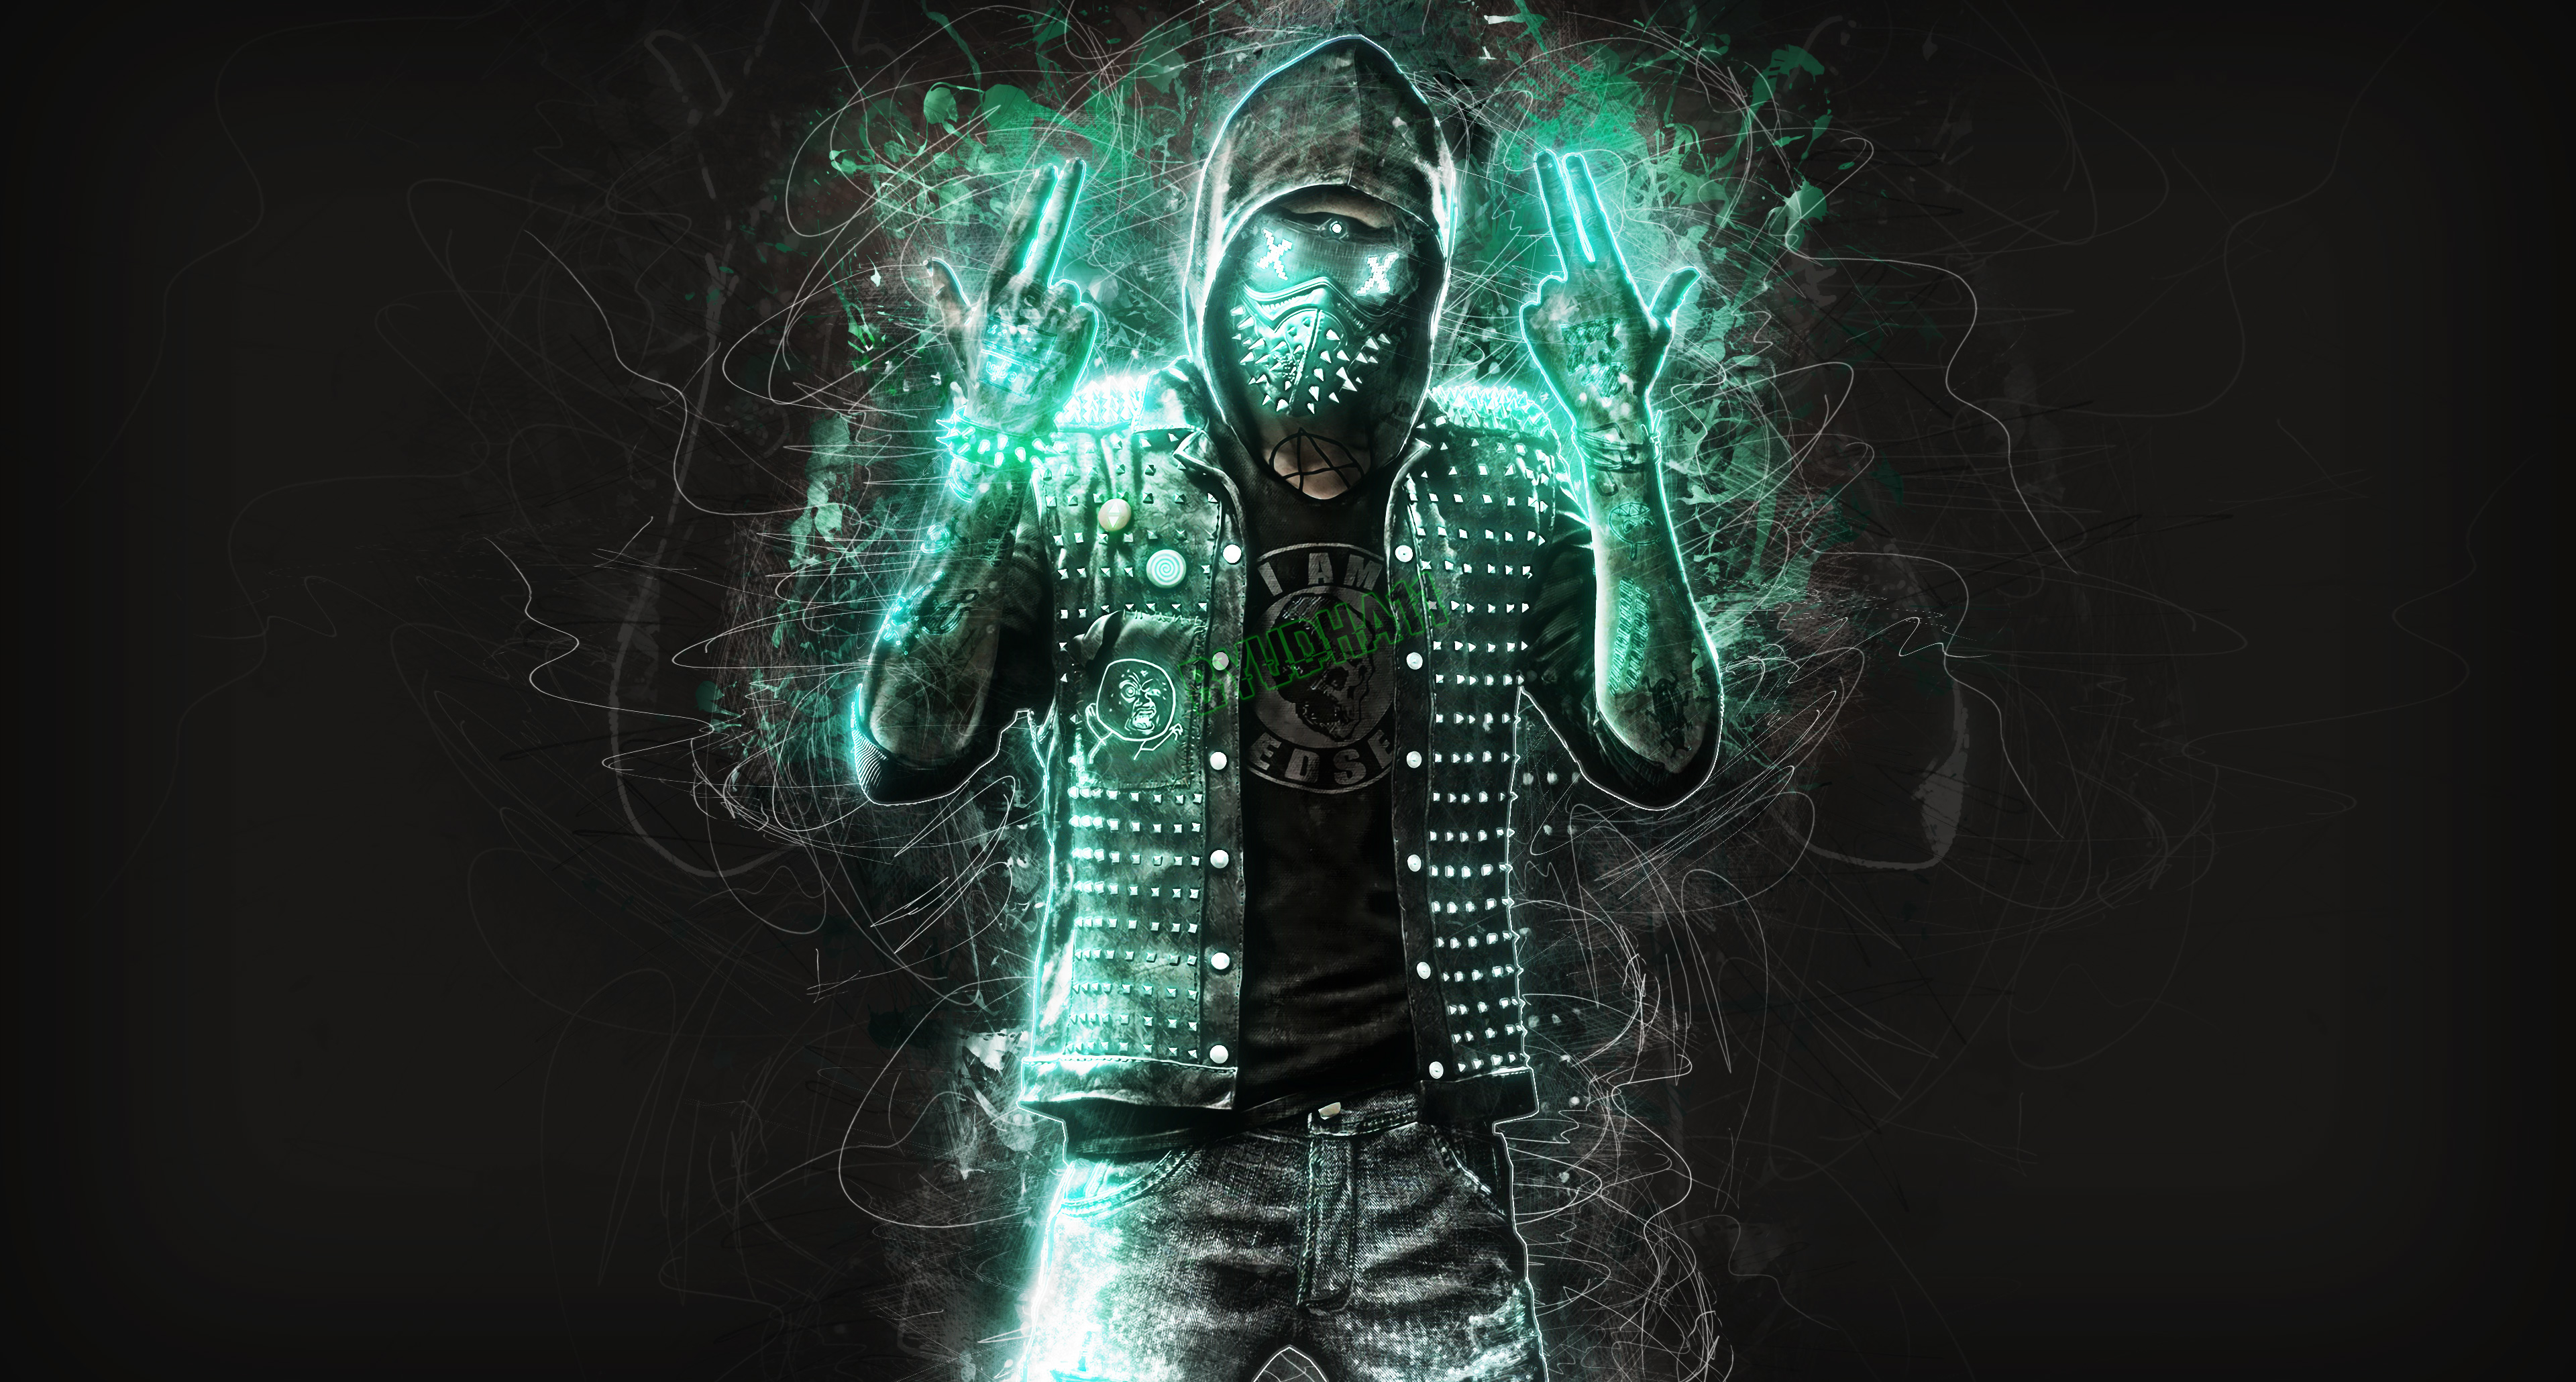 In a Dark Room With Our Secrets — Watch Dogs 2 Wallpapers